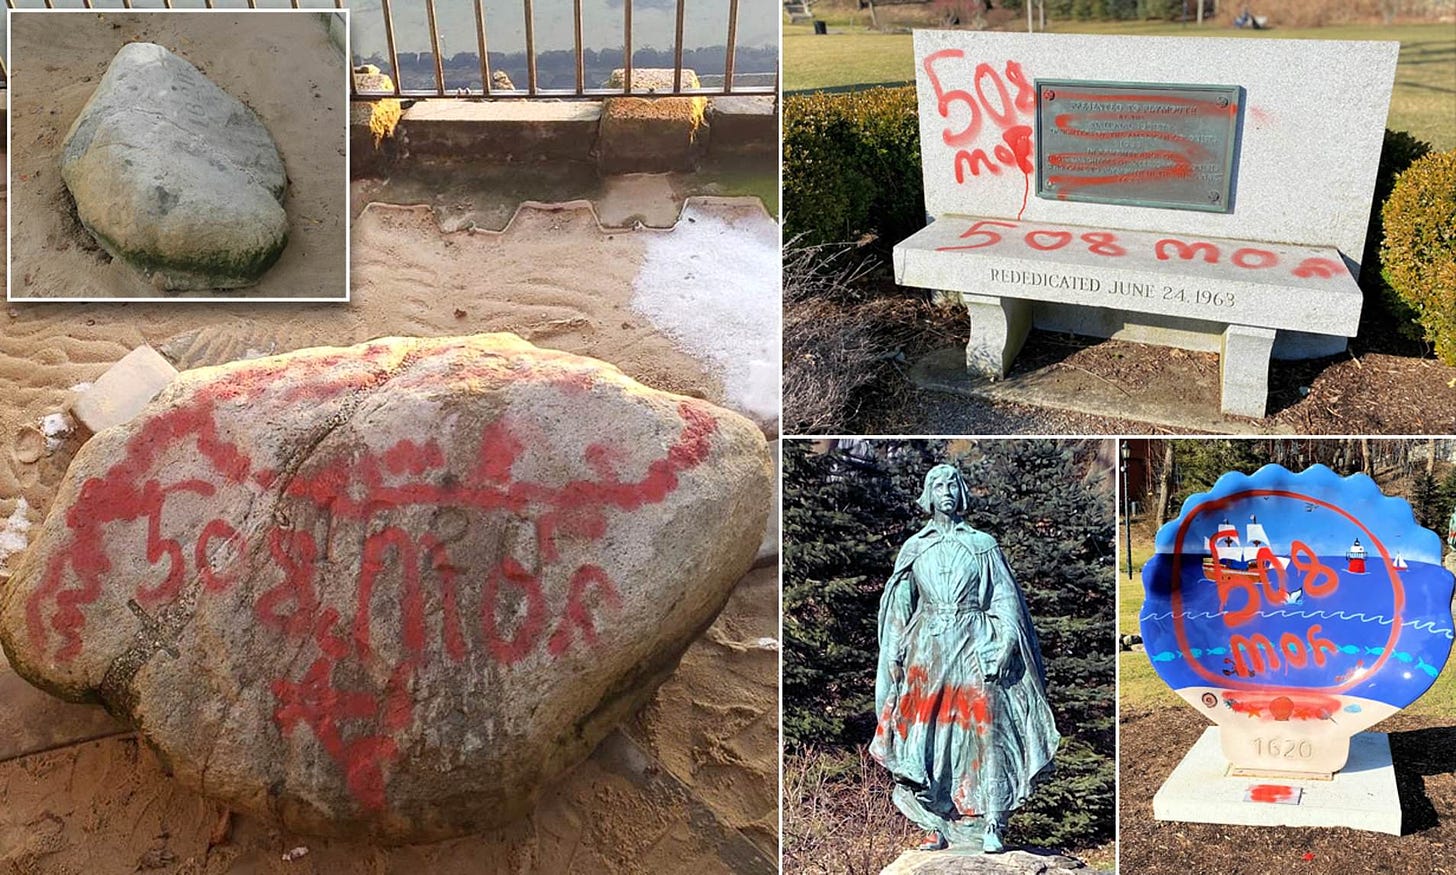 Vandals cover Plymouth Rock in red graffiti | Daily Mail Online